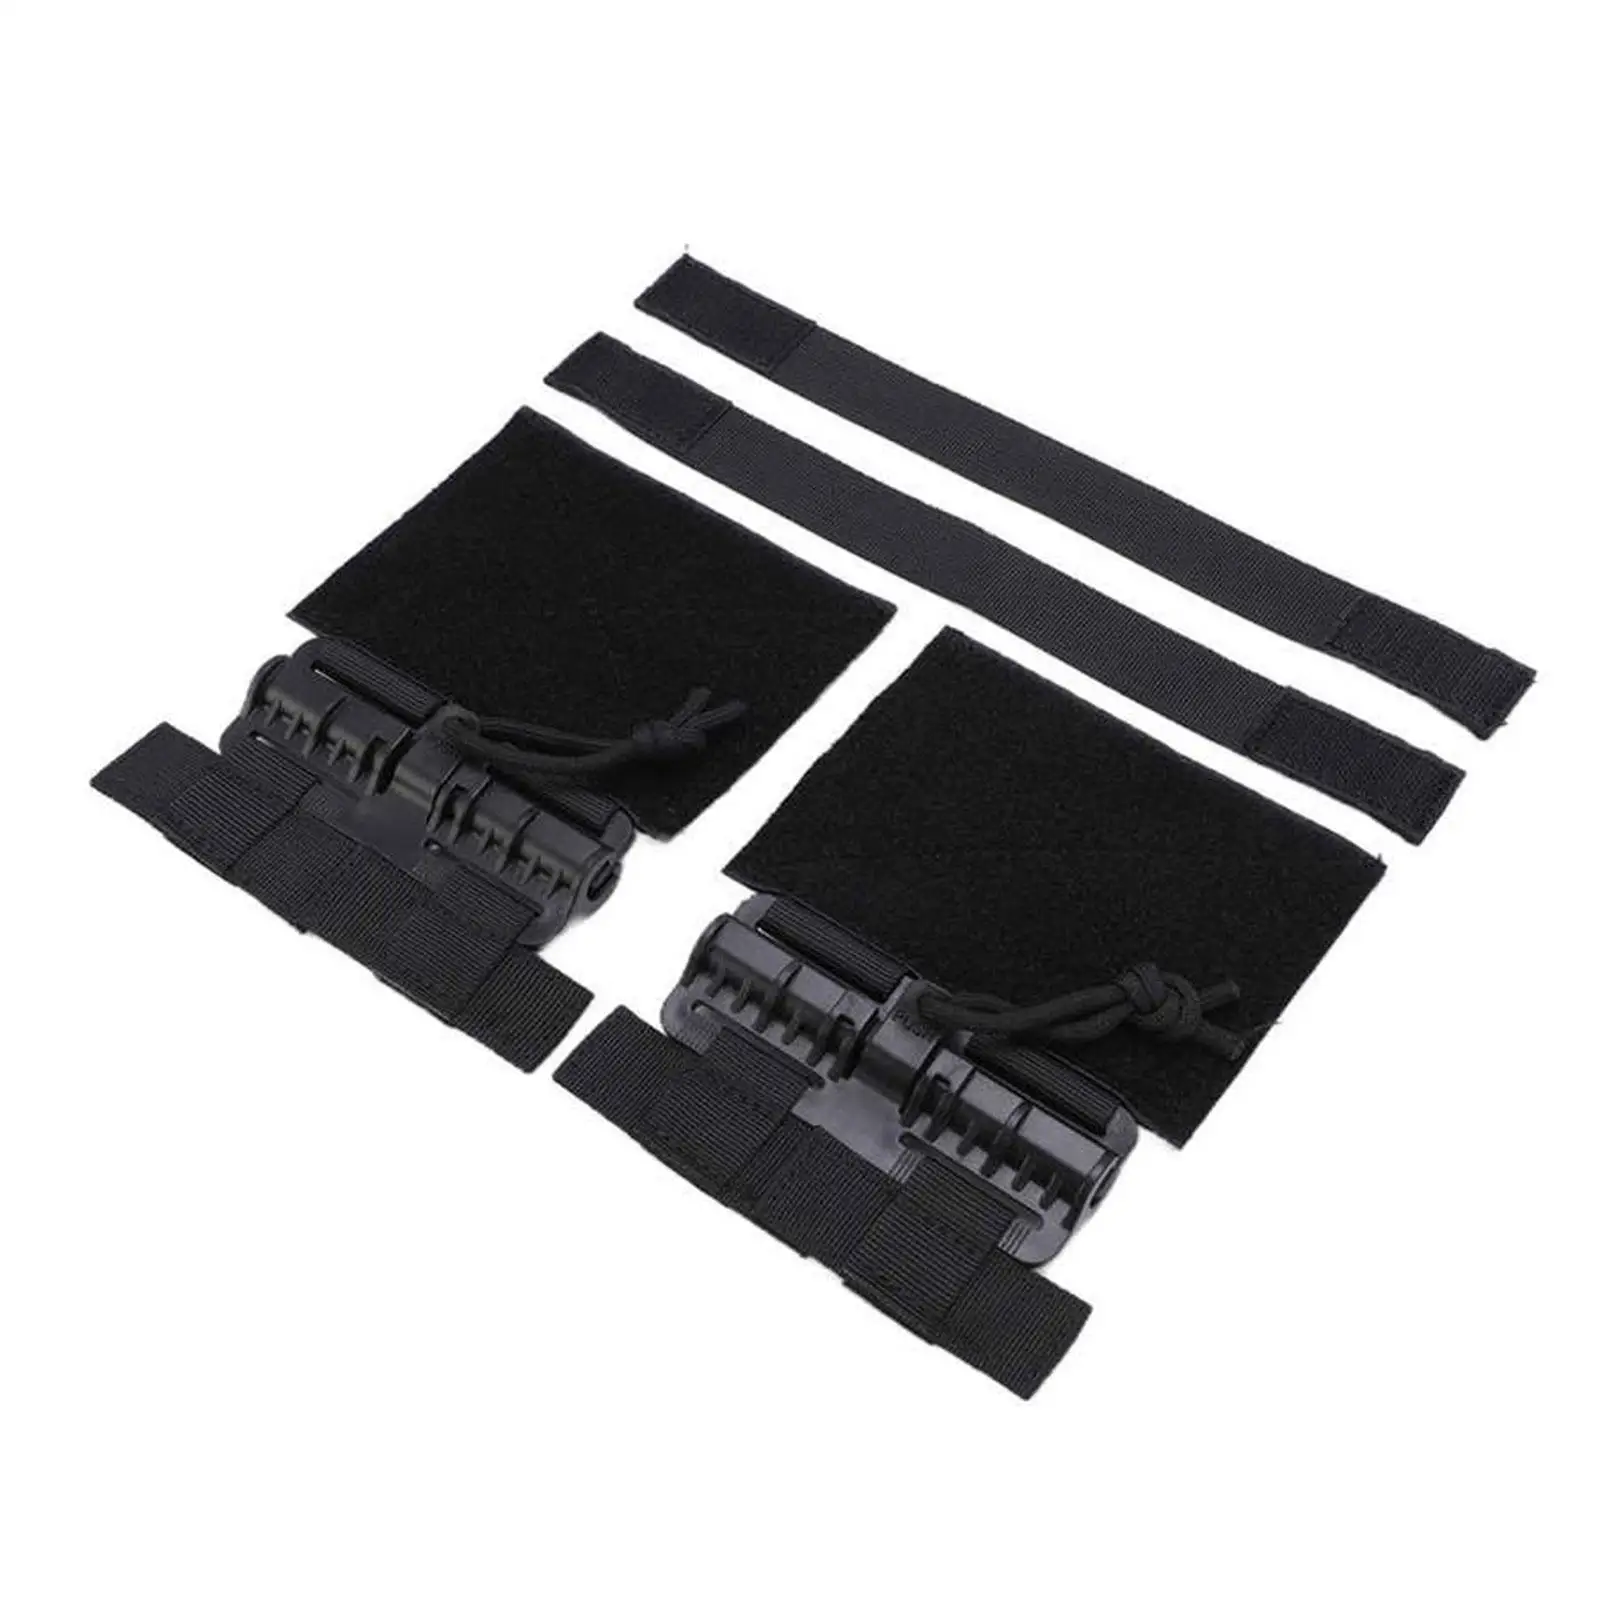 2Pcs Vest Removal Buckle Set Cummerbund Adapter Single Point High Speed Quick Assembly Replacement for Cosplay CS 6094 for Jpc